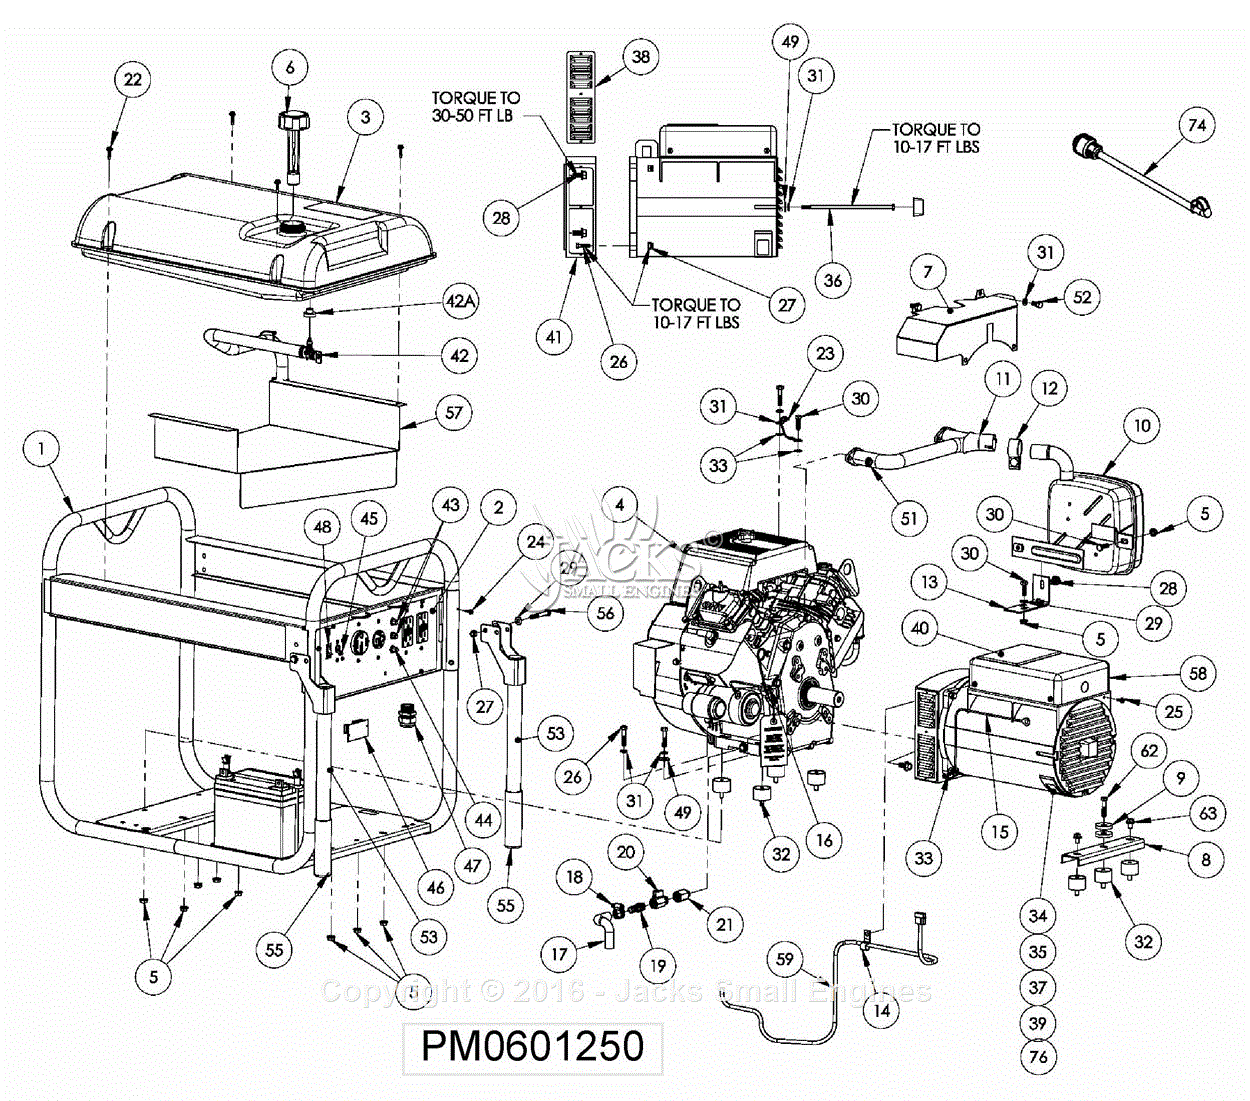 Powermate Formerly Coleman Pm0601250 Parts Diagram For